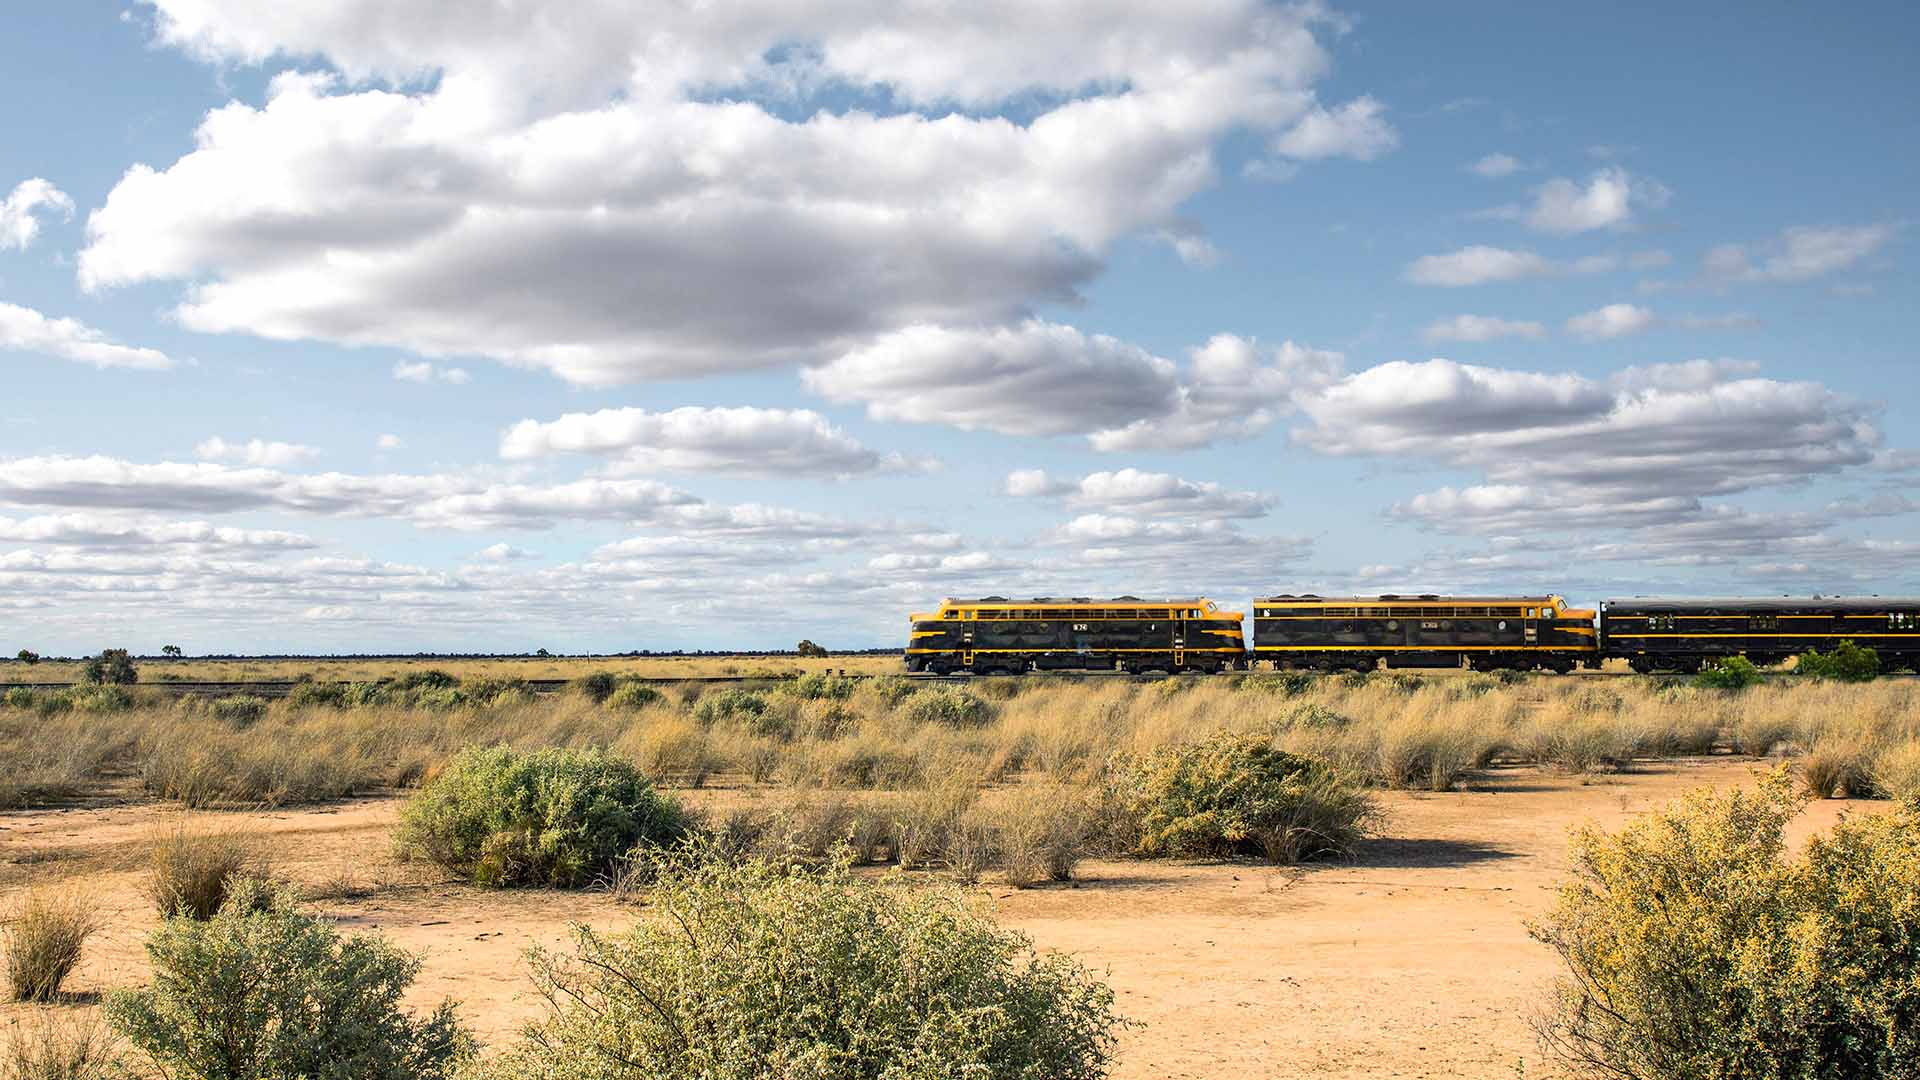 This Luxe and Leisurely Trip Will Take You Across the Outback on One of Australia's Oldest Trains